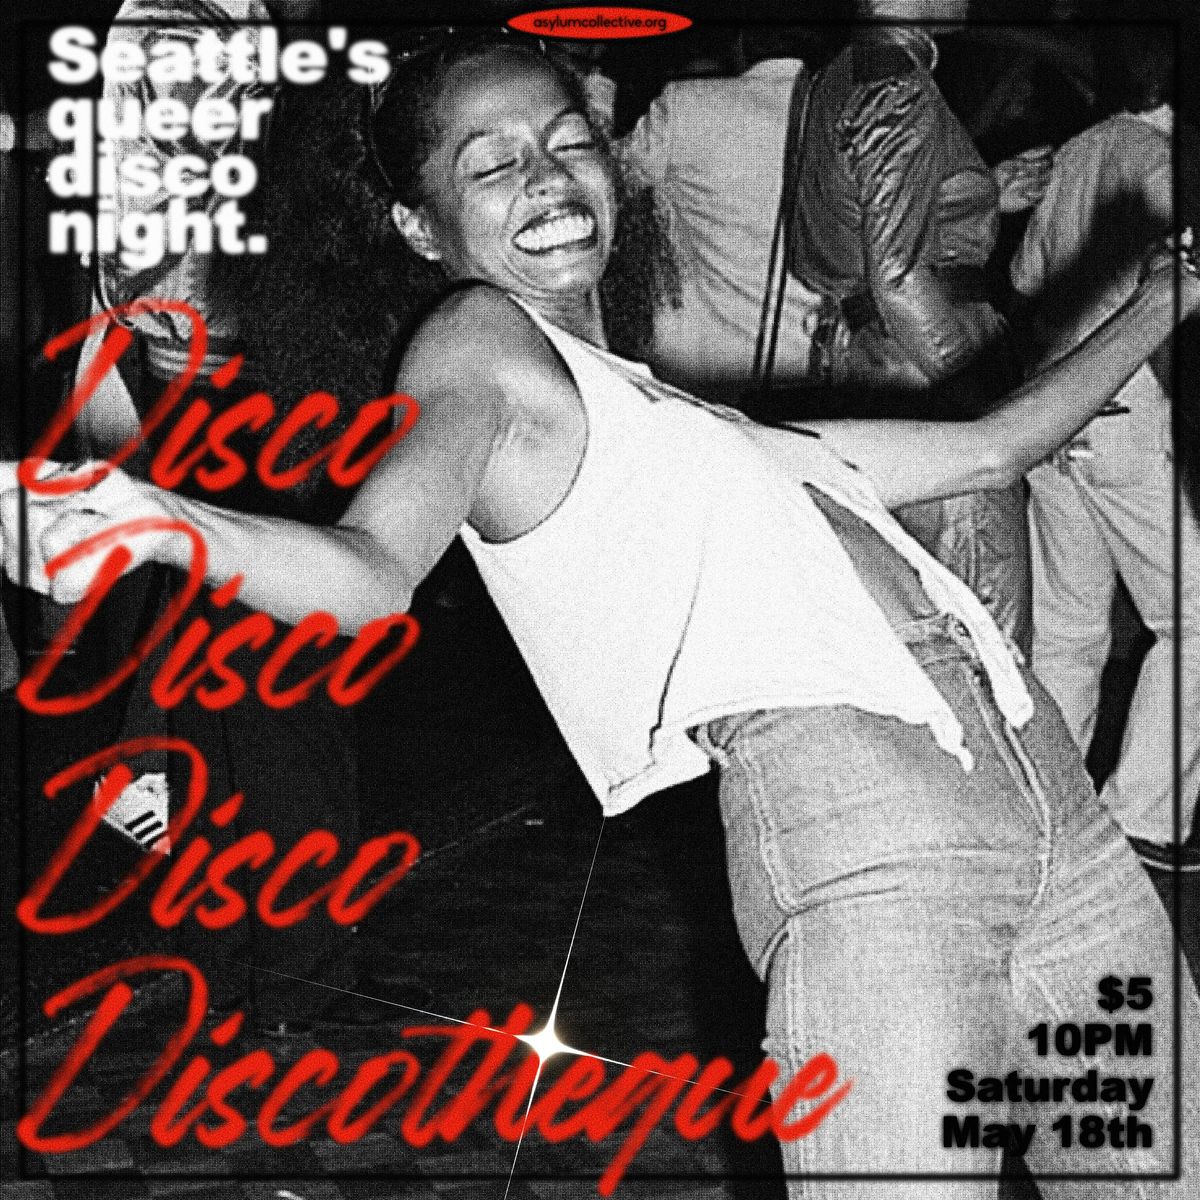 DISCOTHEQUE -- Monthly Queer Disco Night